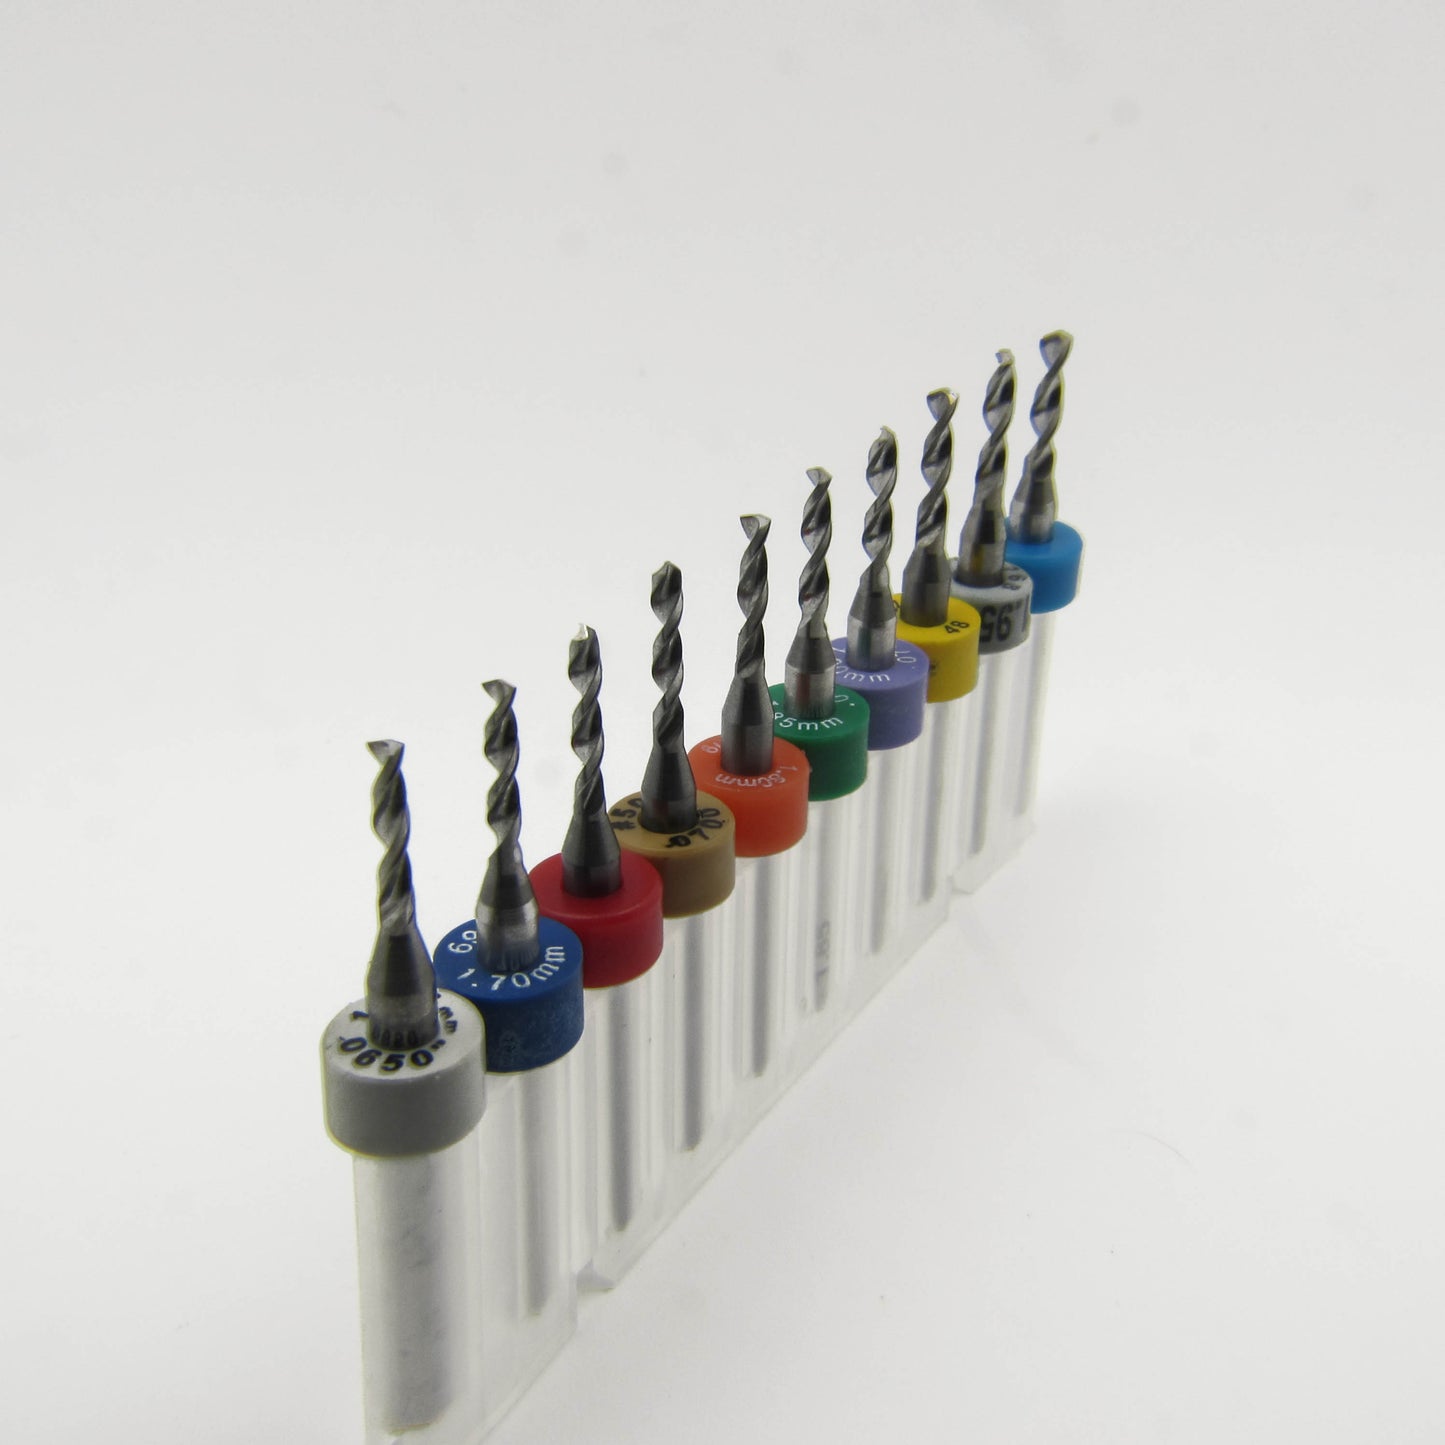 Incremental Size Solid Carbide Drill Set - Ten Pieces .065" - .0781" ID05This Incremental Size Solid Carbide Drill Set includes  .065 1.65mm .067 #51 1.7mm .069 1.75mm .07 #50 1.8mm #49 1.85mm 1.9mm .076 #48 1.95mm 5/64